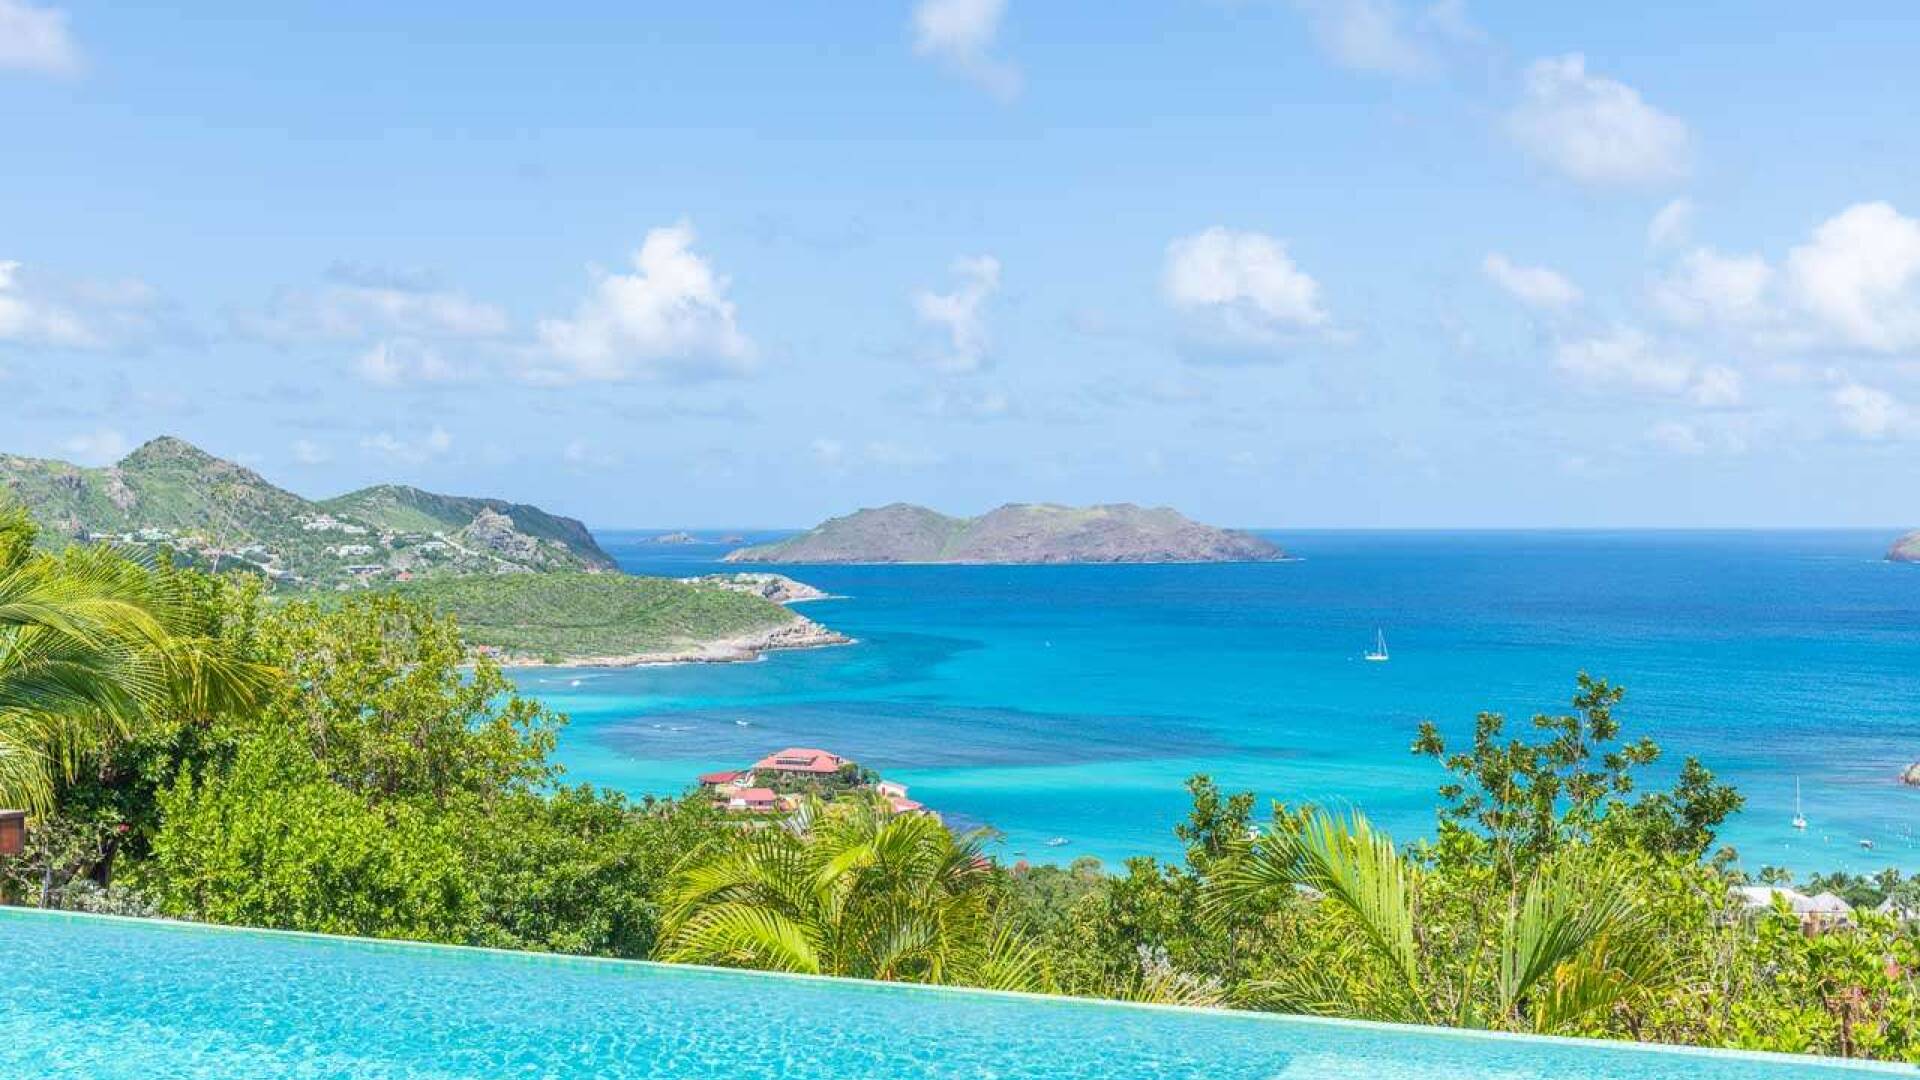 The view from WV ISI, St. Jean, St. Barthelemy